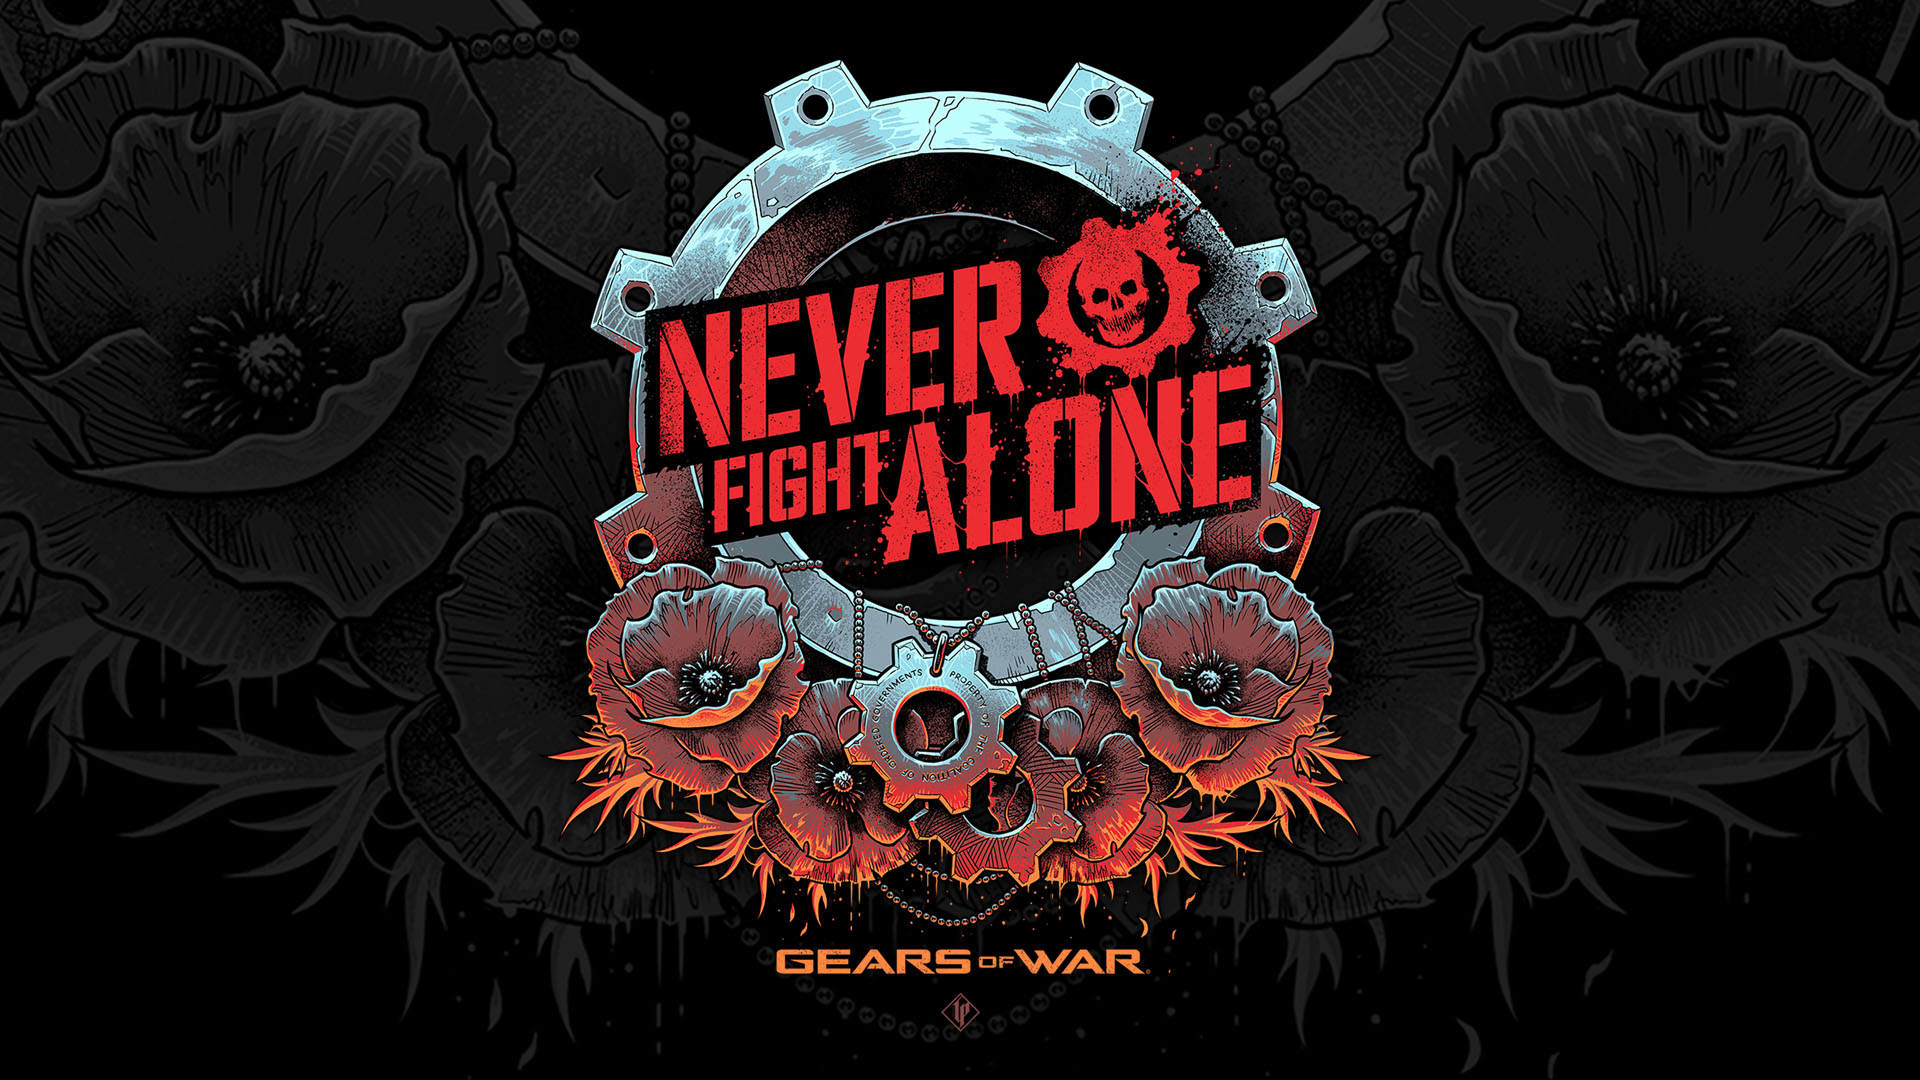 A silver metal gear and red poppy flowers with the “Never Fight Alone” text in red and a red skull on a black textured background.